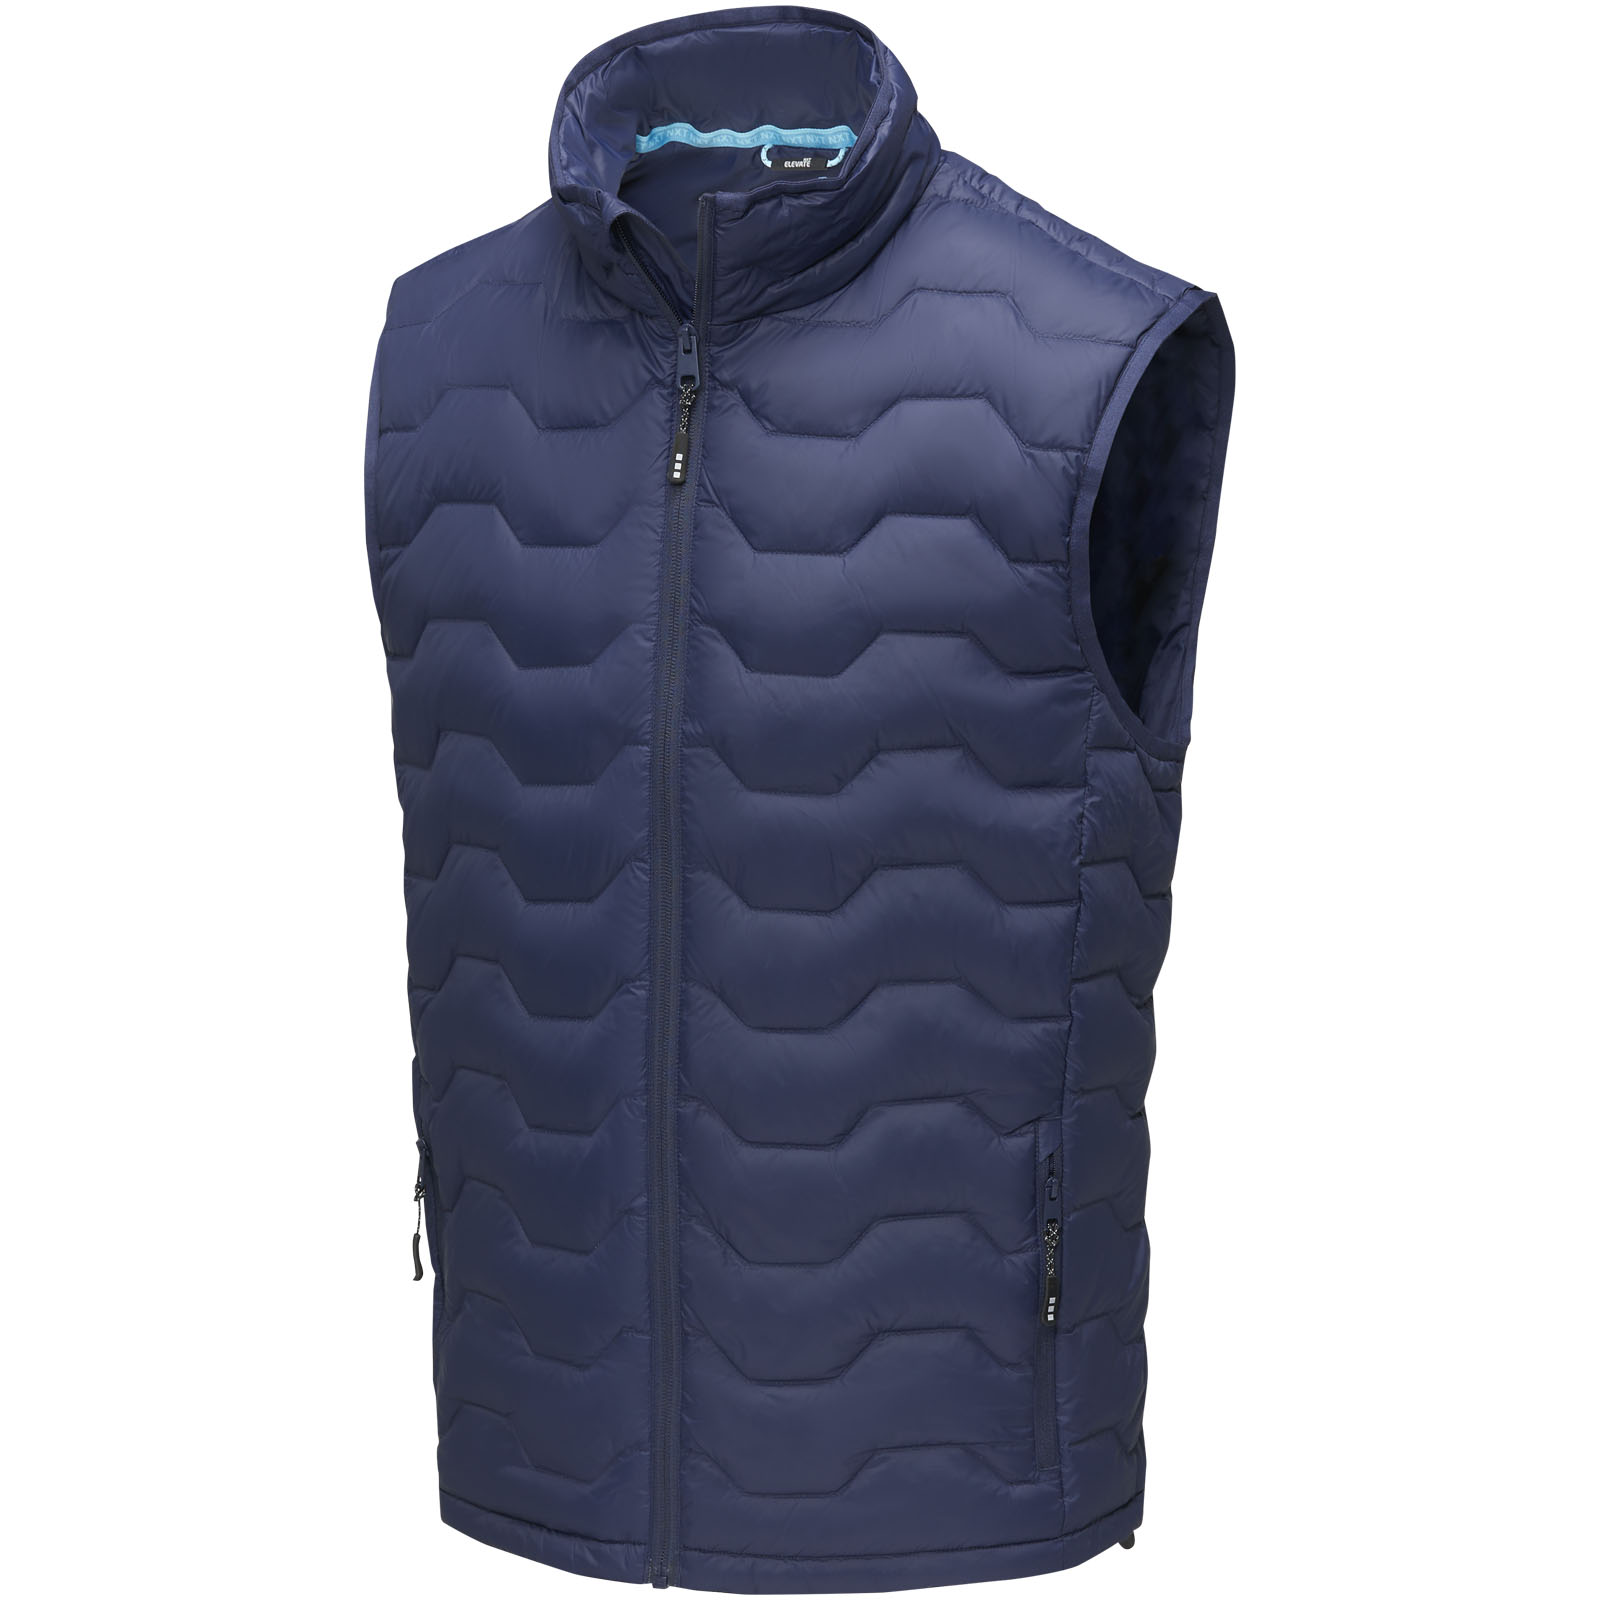 Advertising Bodywarmers - Epidote men's GRS recycled insulated down bodywarmer